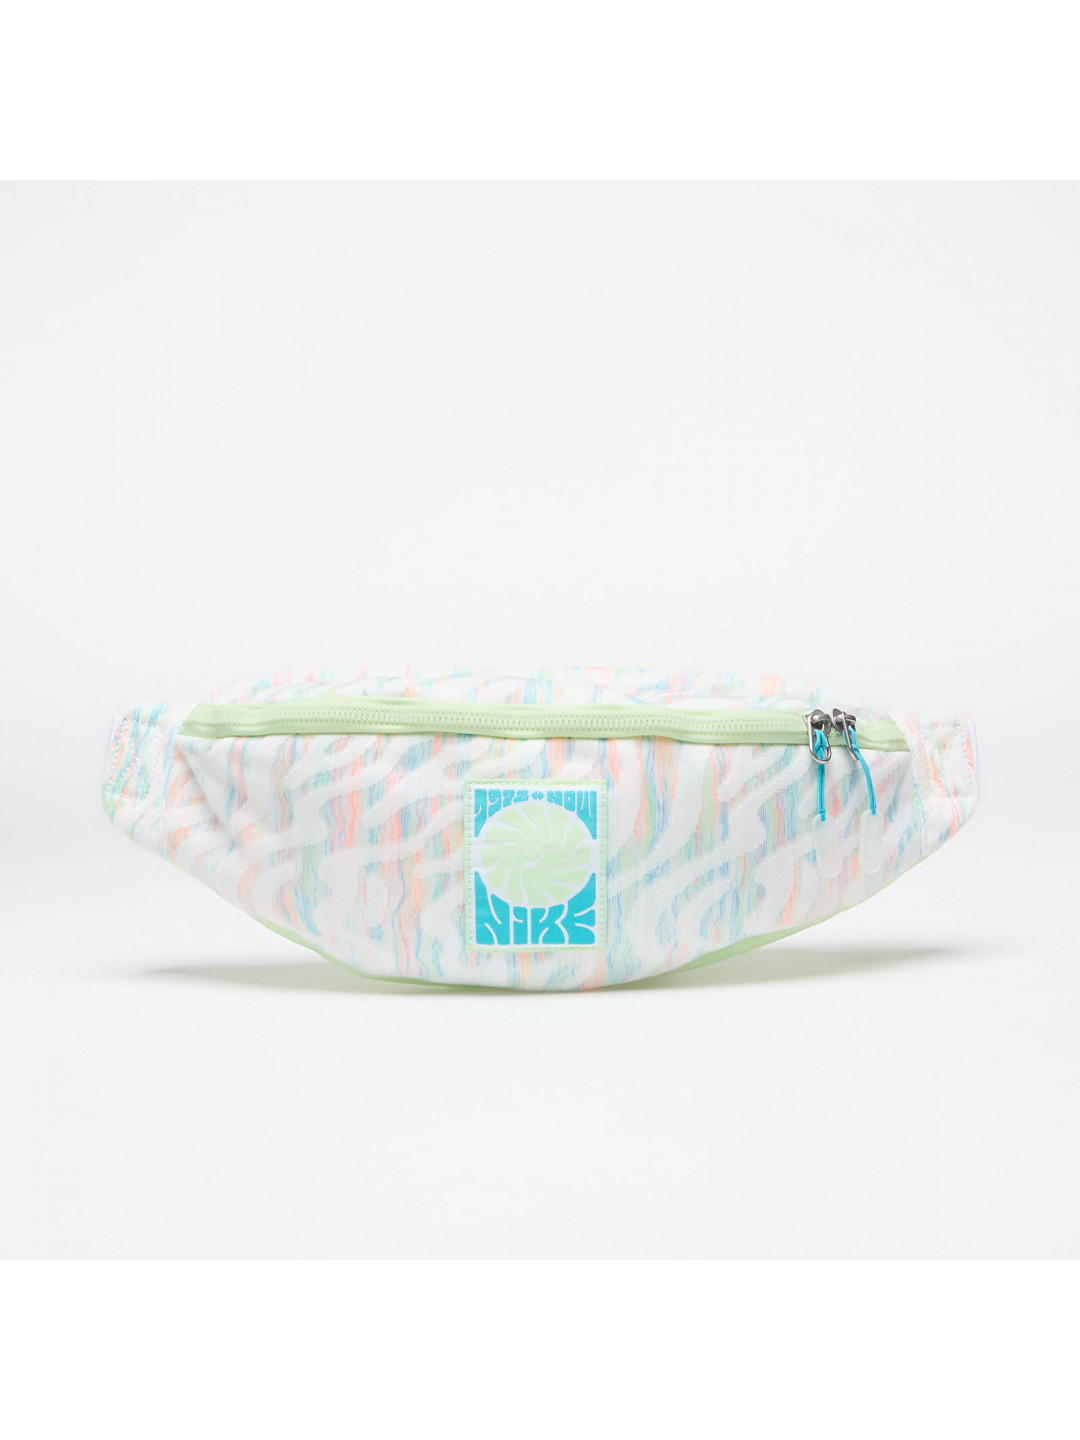 Nike Heritage Fanny Pack White Barely Volt Dusty Cactus